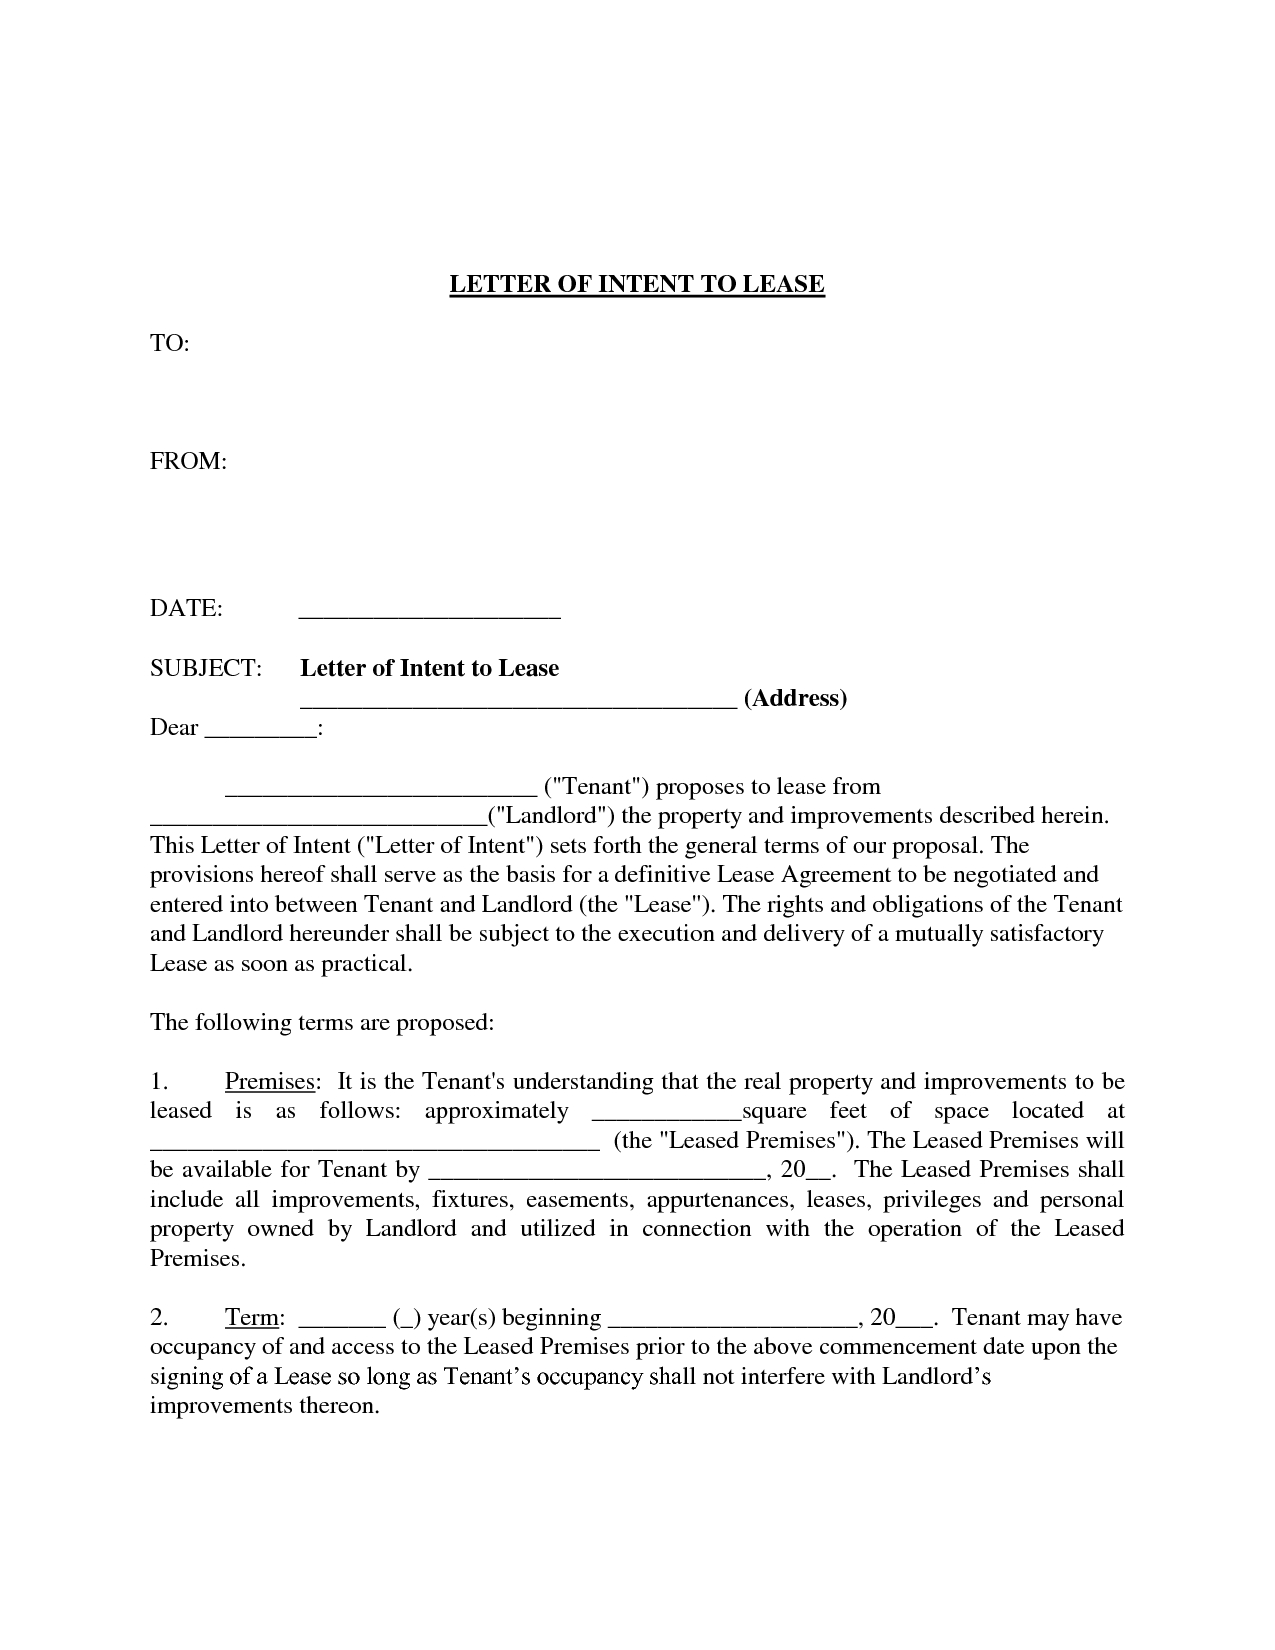 Letter Of Intent To Lease Commercial Property Template Examples